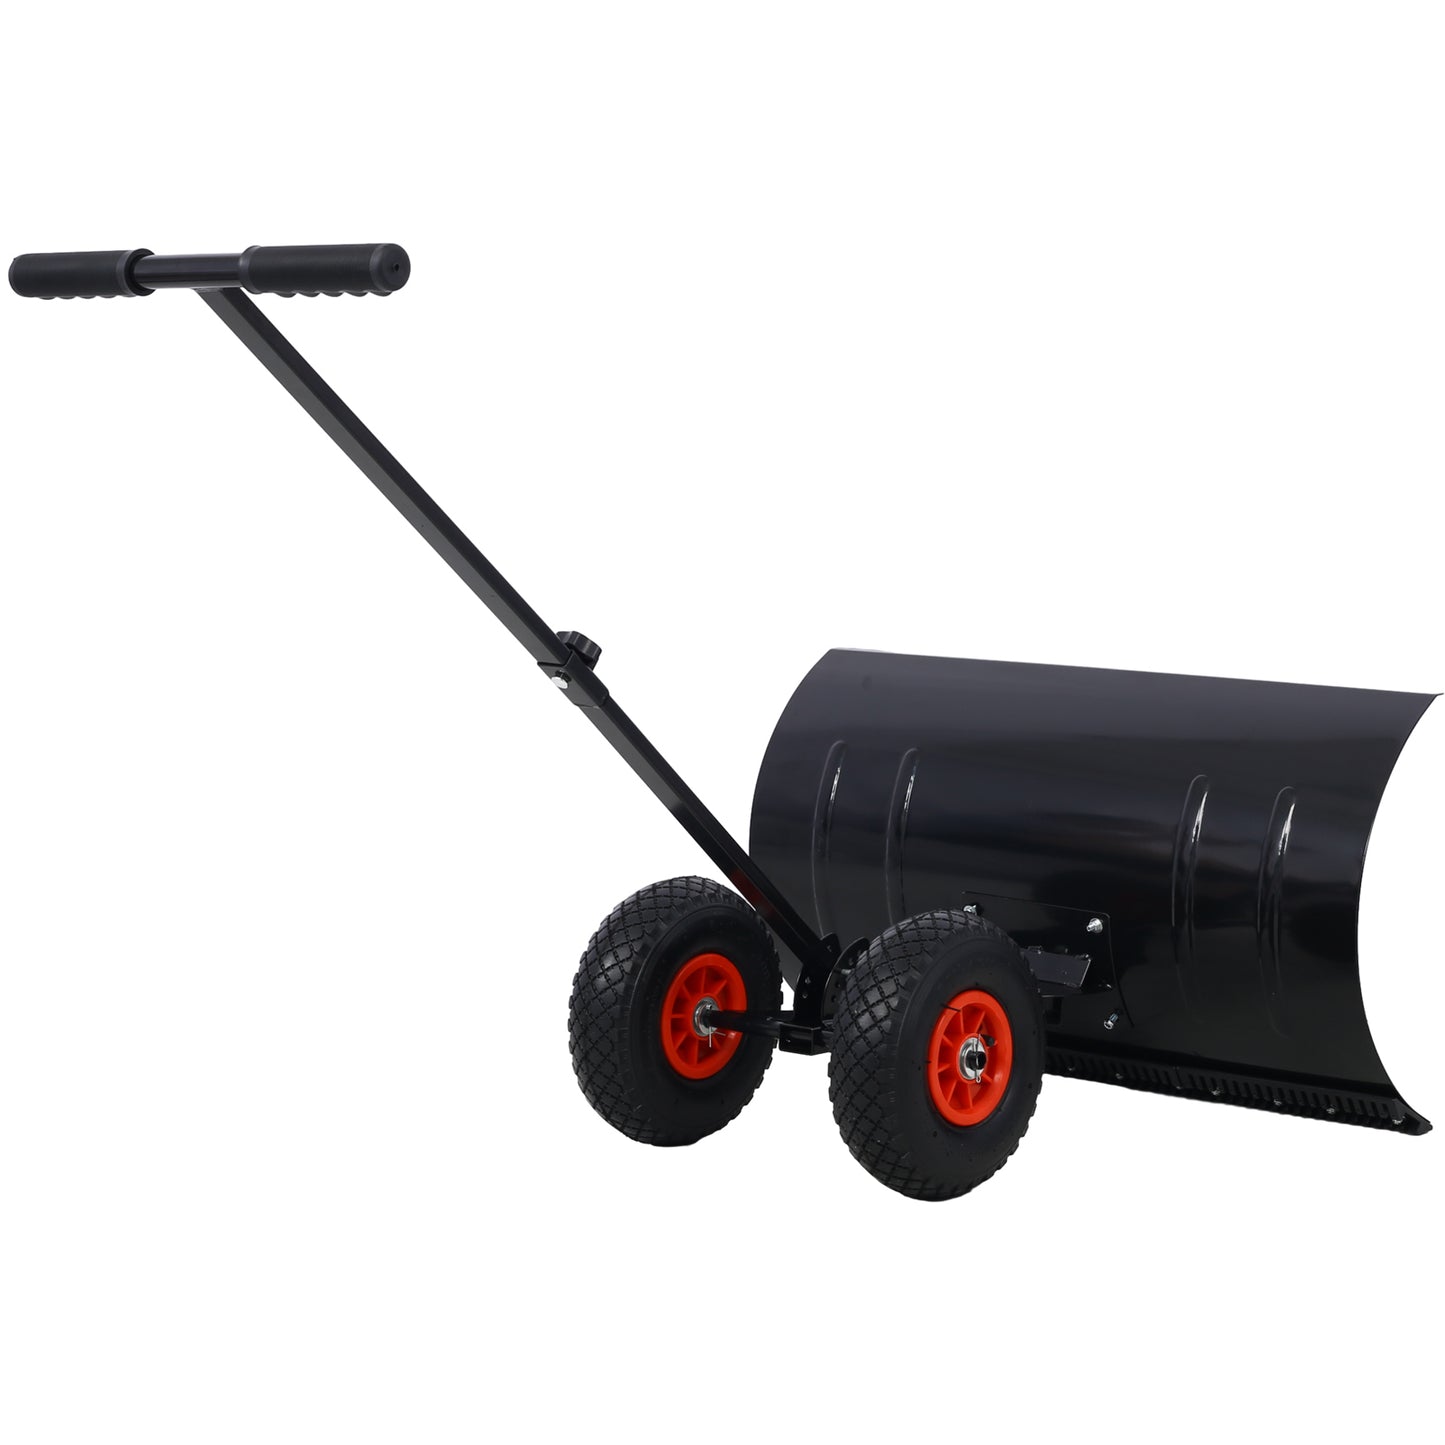 Snow Shovel with Wheels, Snow Pusher, Cushioned Adjustable Angle Handle Snow Removal Tool, 29" Blade, 10" Wheels,black color